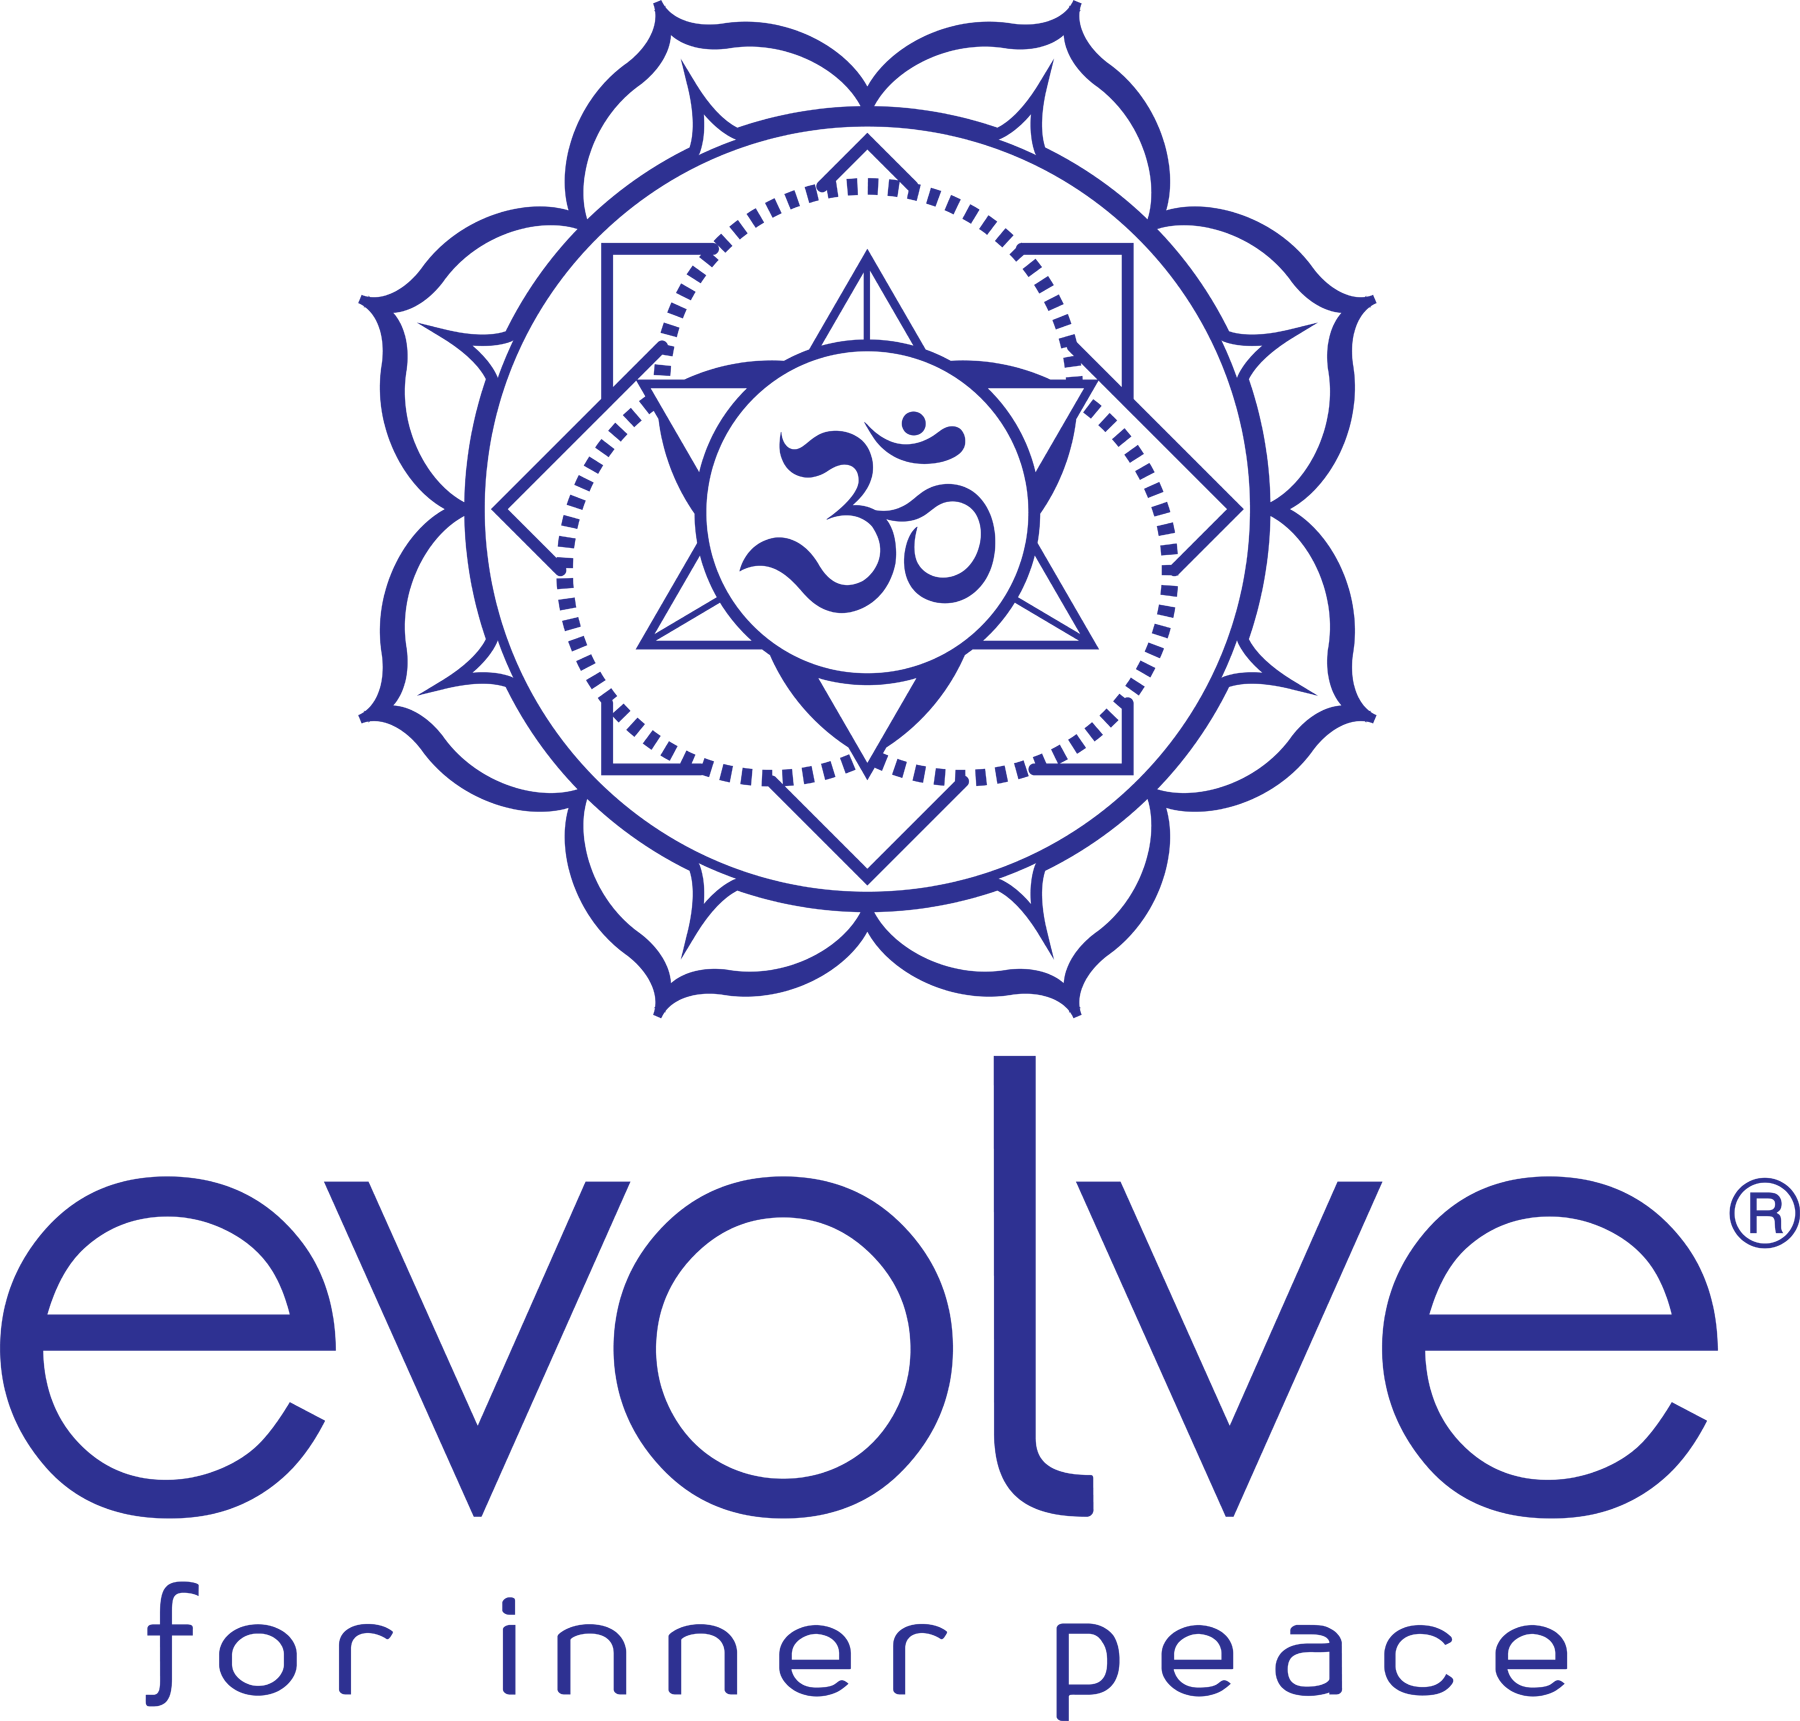 Evolve in Crystal Lake IL | Crystals and Stones, Minerals, Fossils, Rocks, Incense, Metaphysical and New-Age Books, Handmade, Eco-Conscious, Local Artists and More  |  A Gathering of Spiritual Paths and Esoteric Knowledge